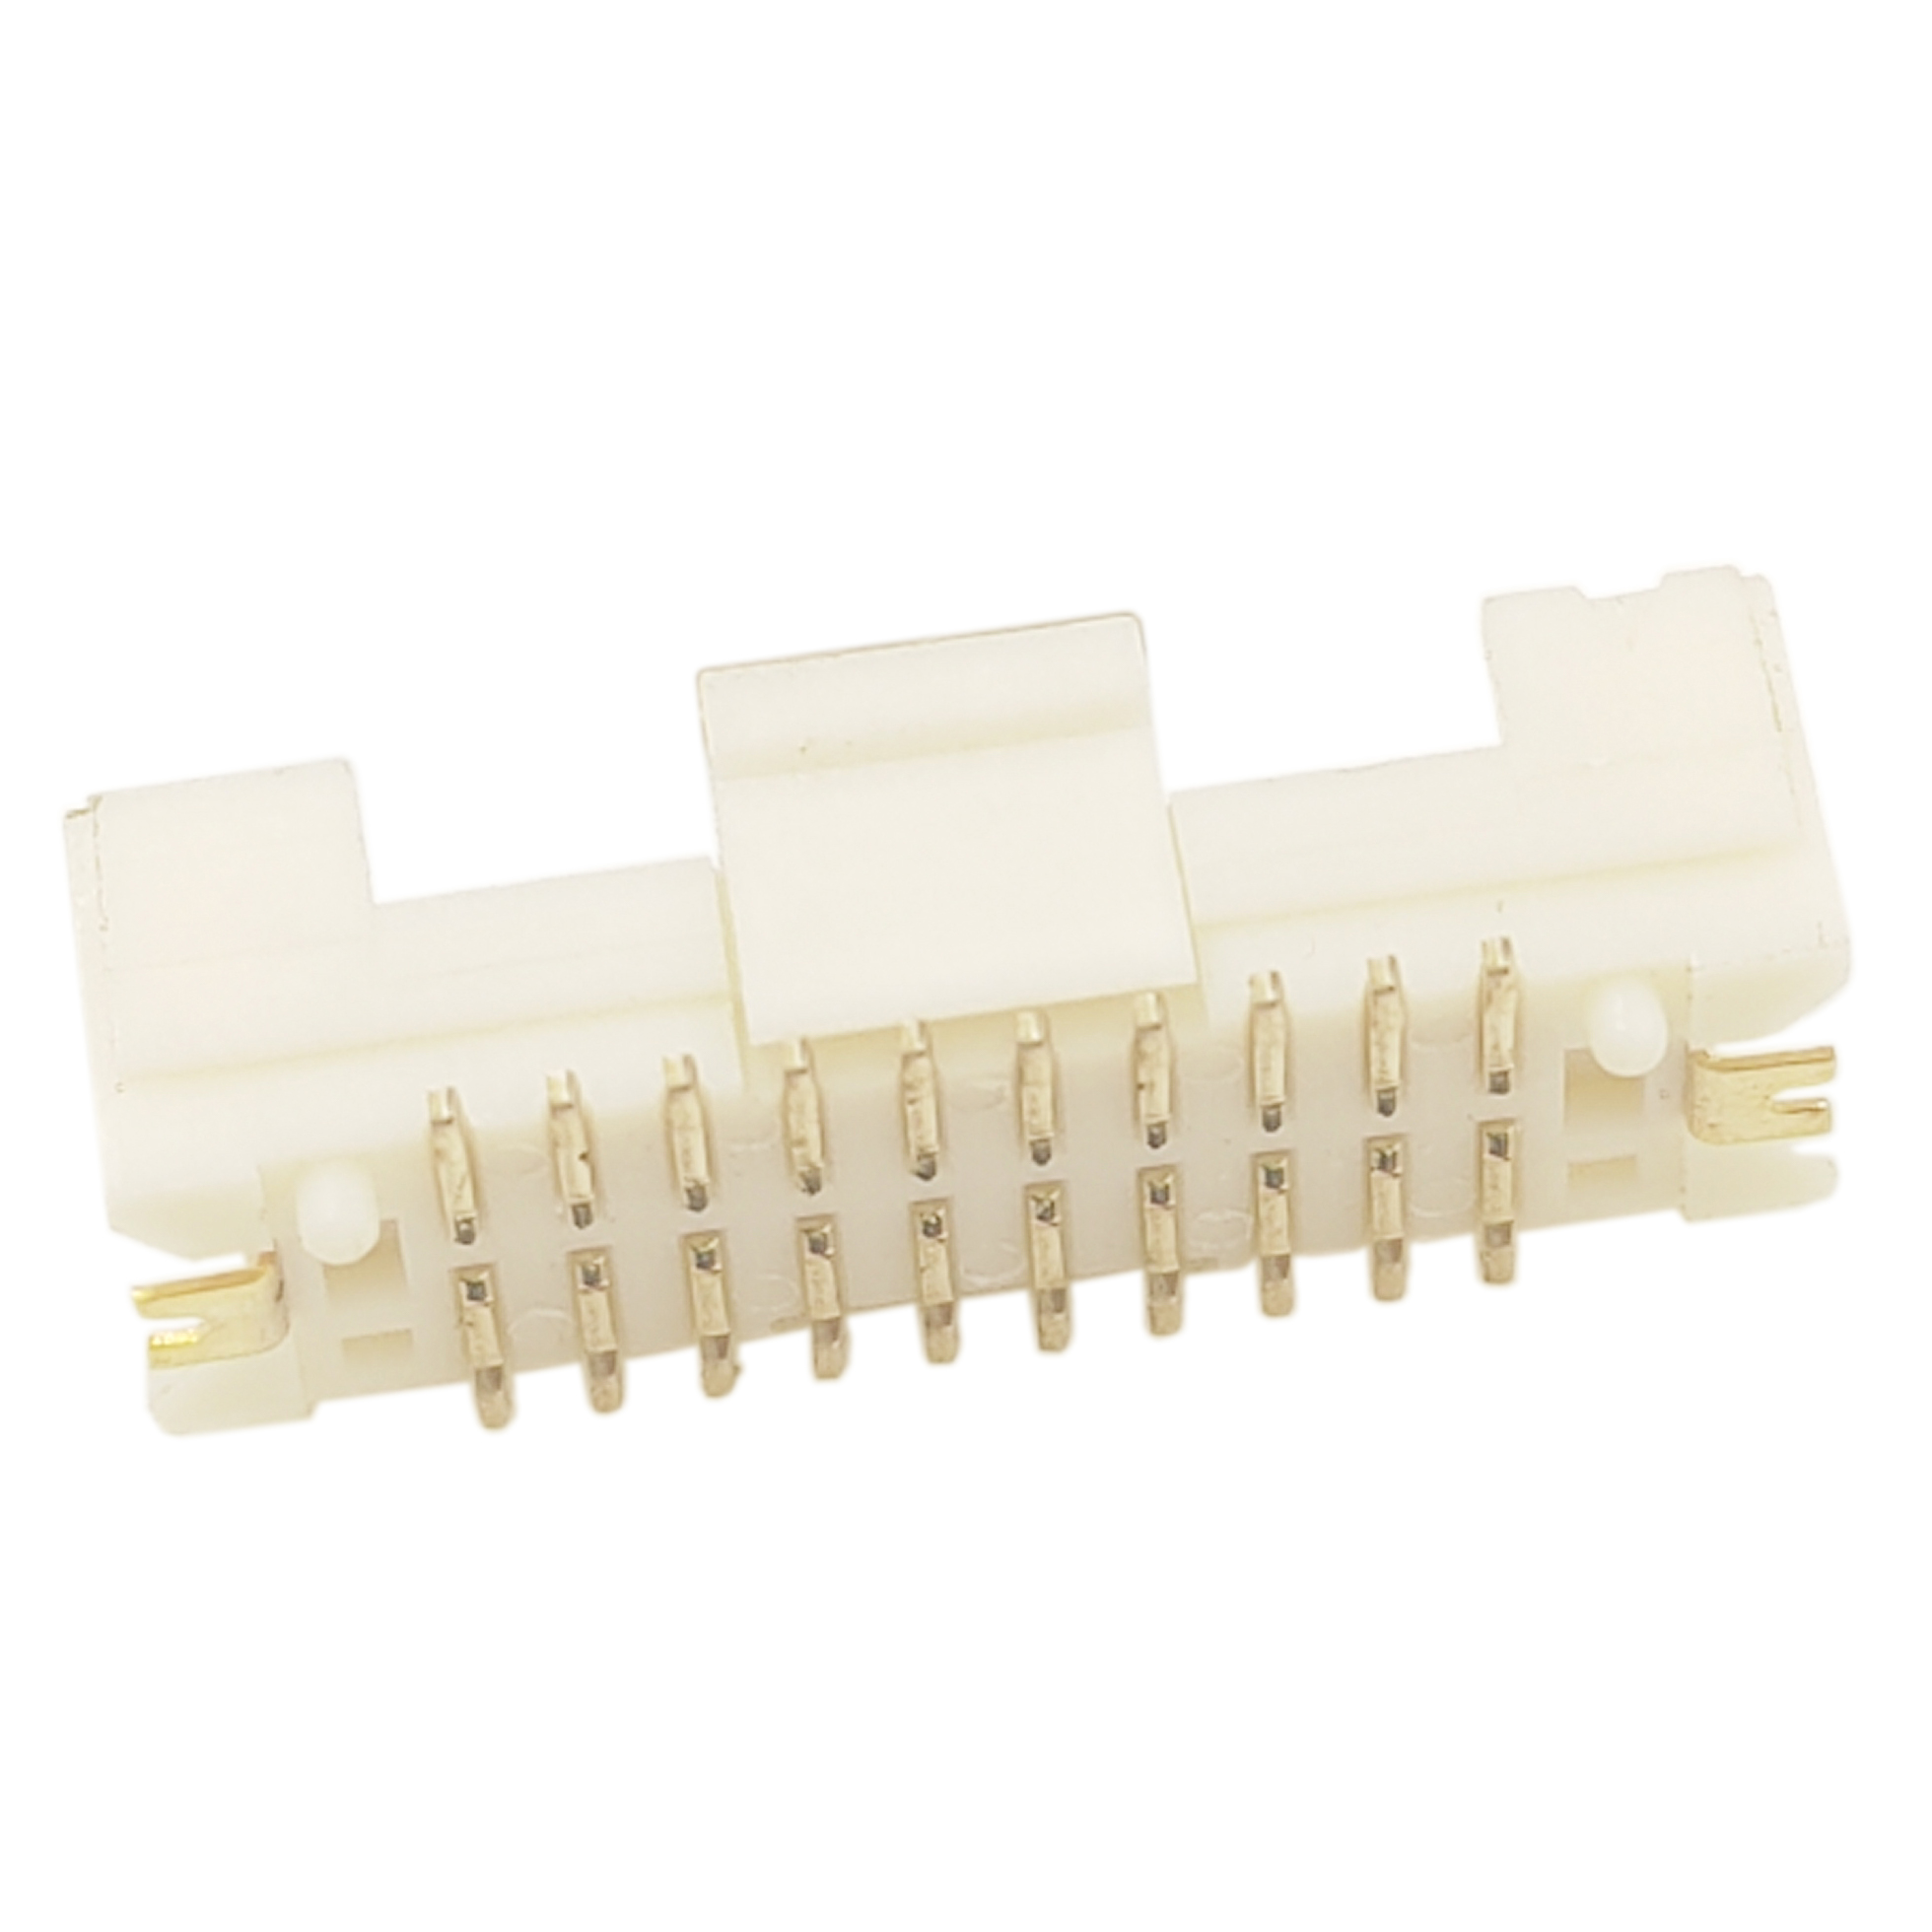 DF13EA-20DP-1.25V is a versatile 20-pin connector designed for various electronic applications. Its 1.25V voltage rating makes it suitable for low-power circuitry. 